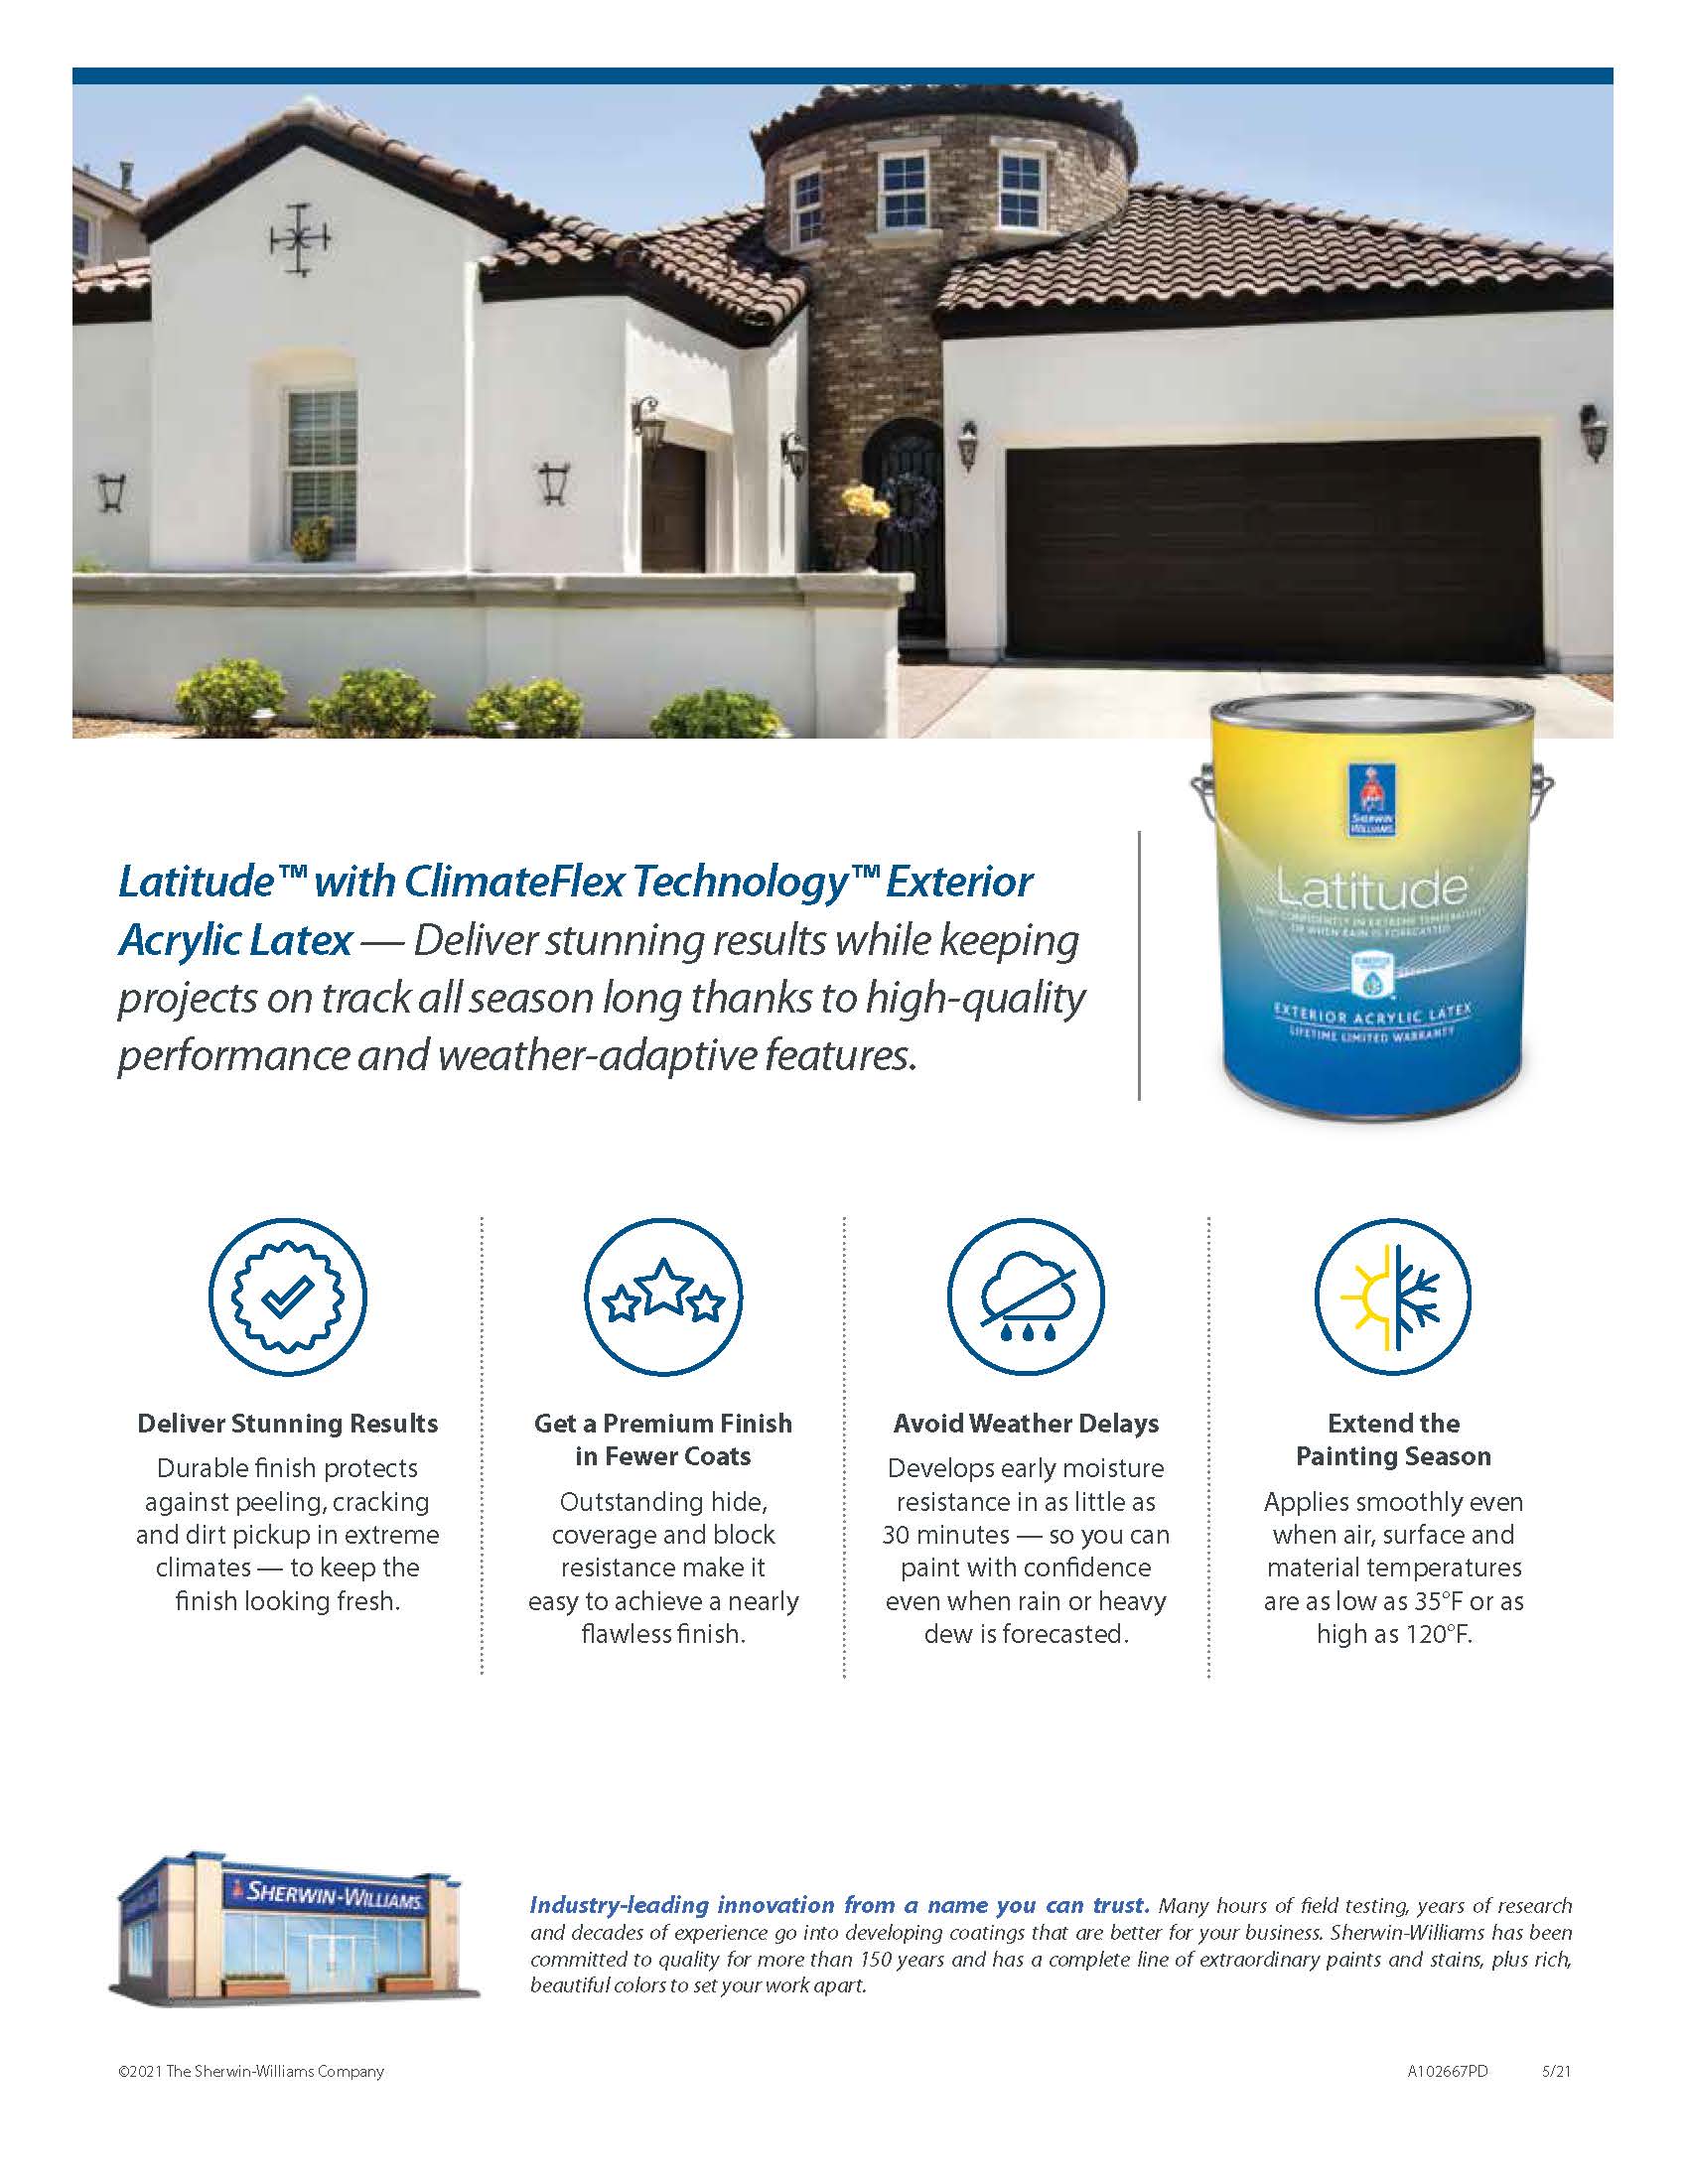 Learn About Sherwin Williams Latitude Exterior Paint